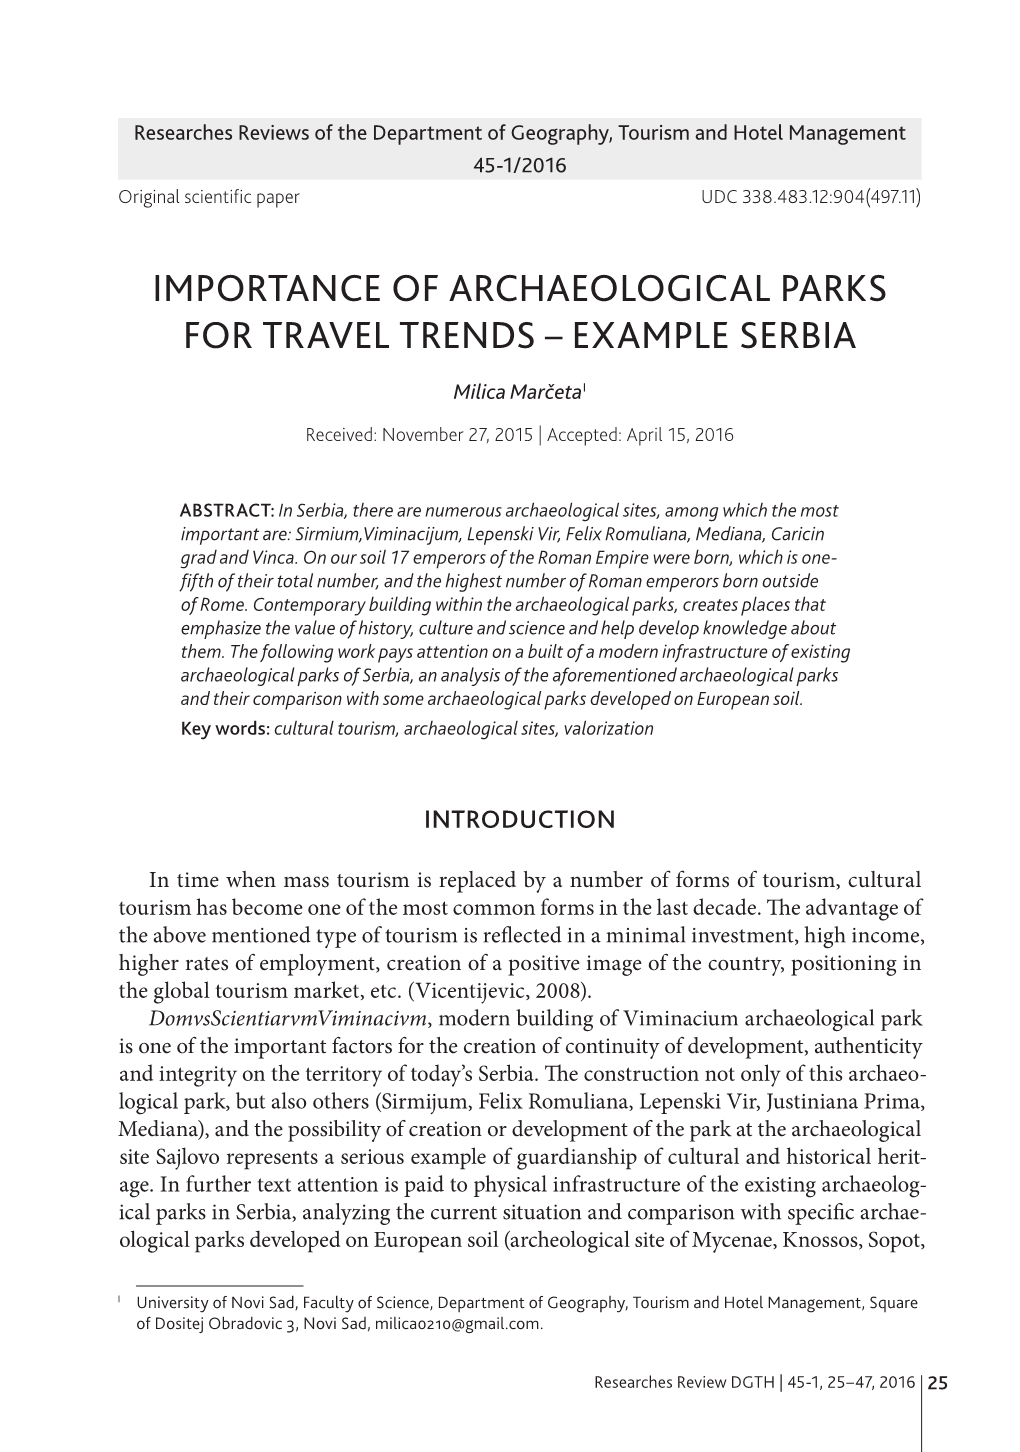 Importance of Archaeological Parks for Travel Trends – Example Serbia